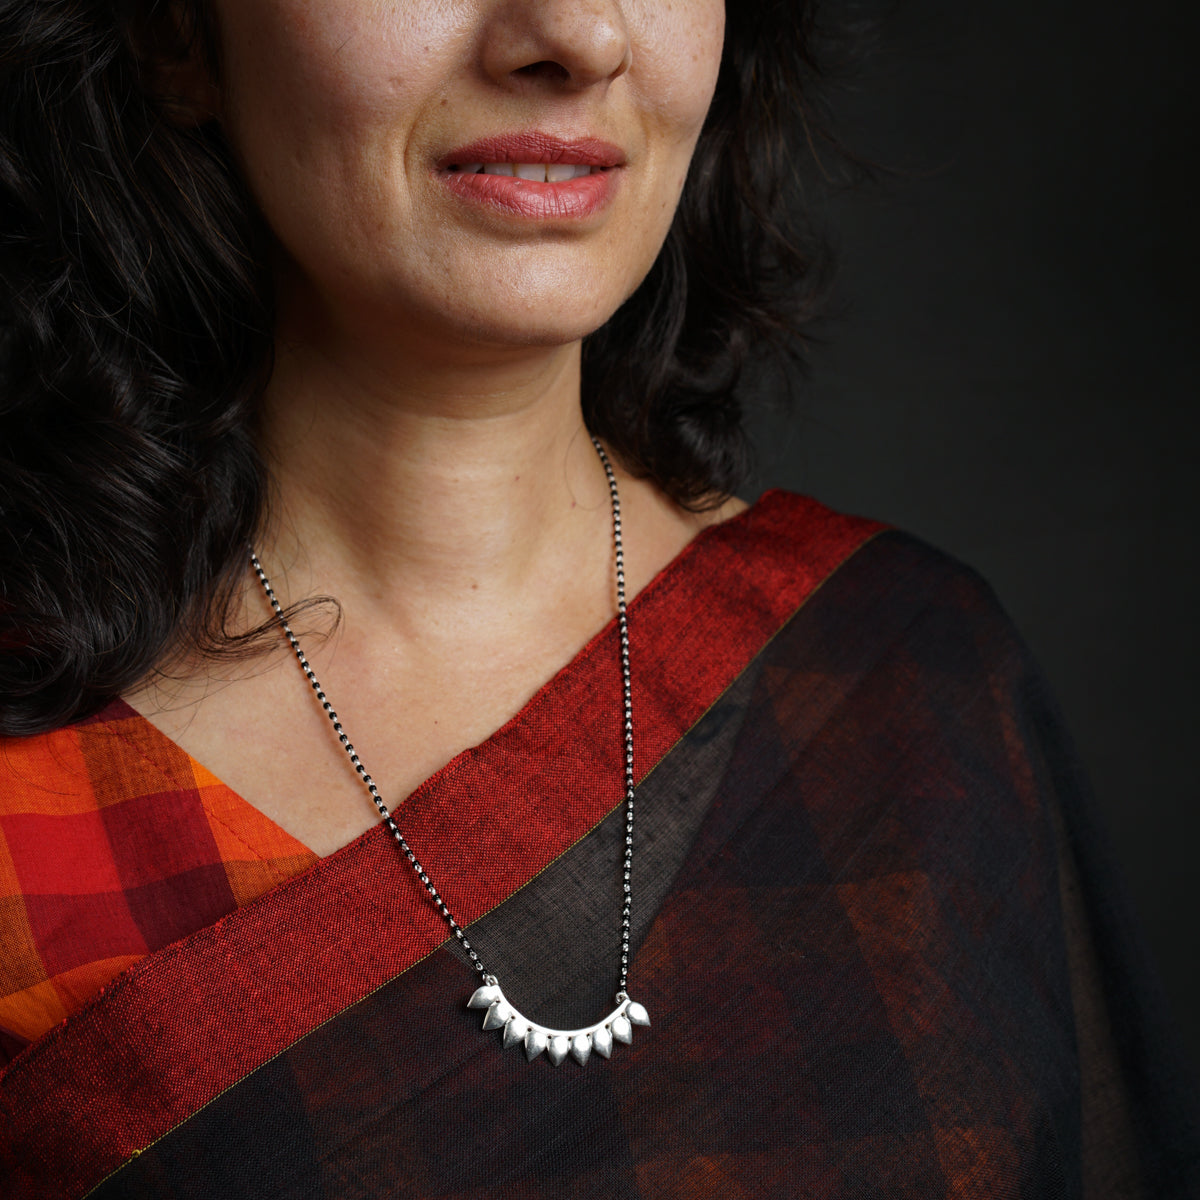 a woman wearing a red and black shirt and a necklace